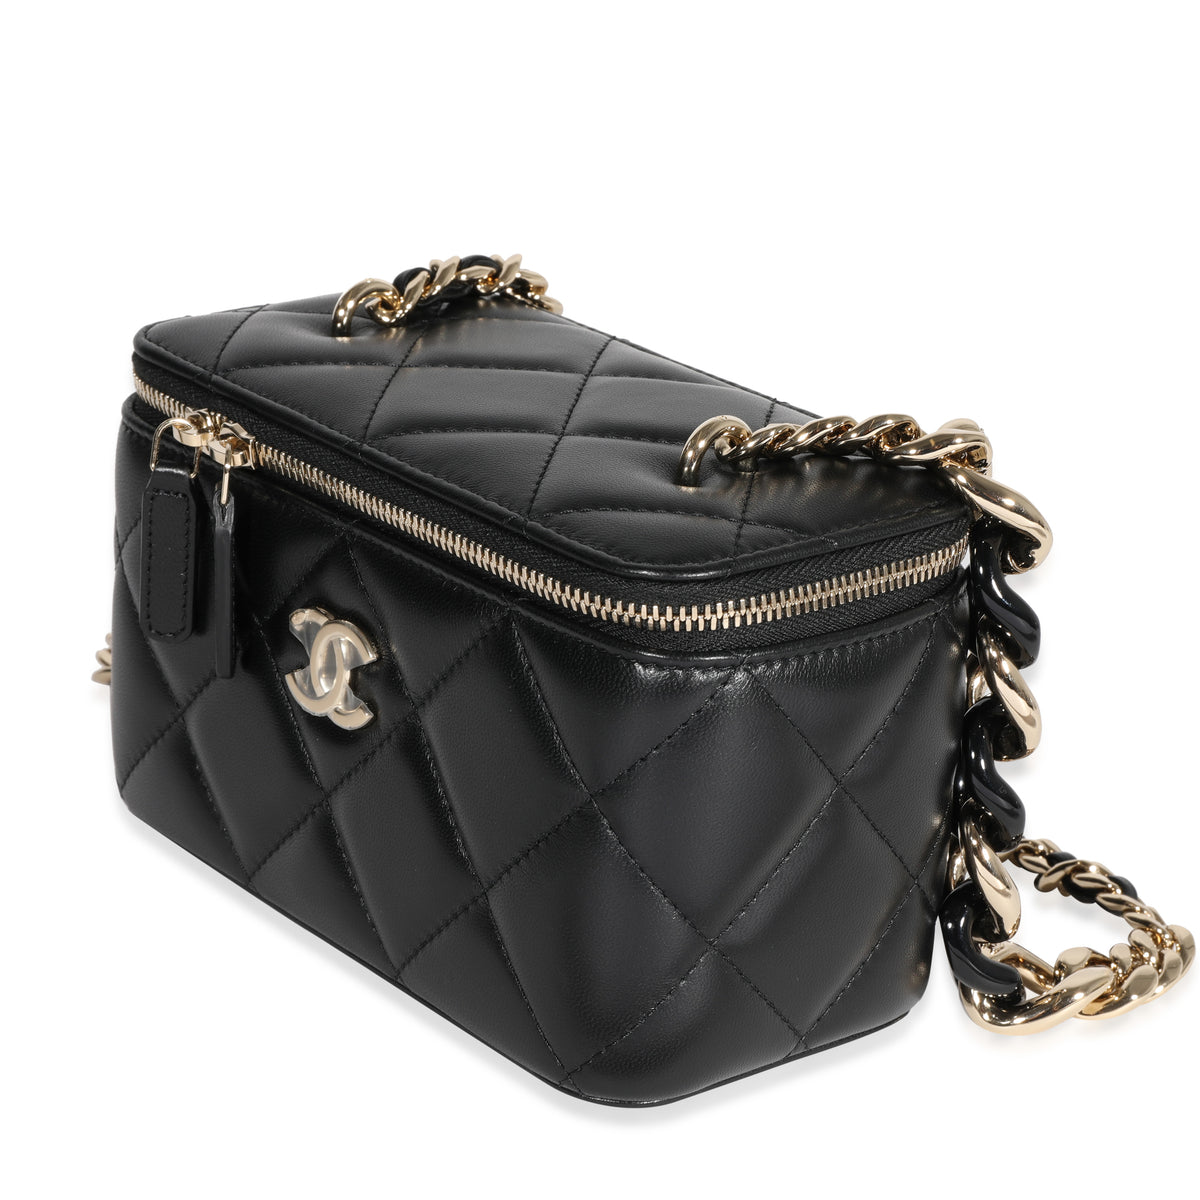 Chanel Black Quilted Lambskin Vanity Case on Chain Gold Hardware (Very Good), Womens Handbag